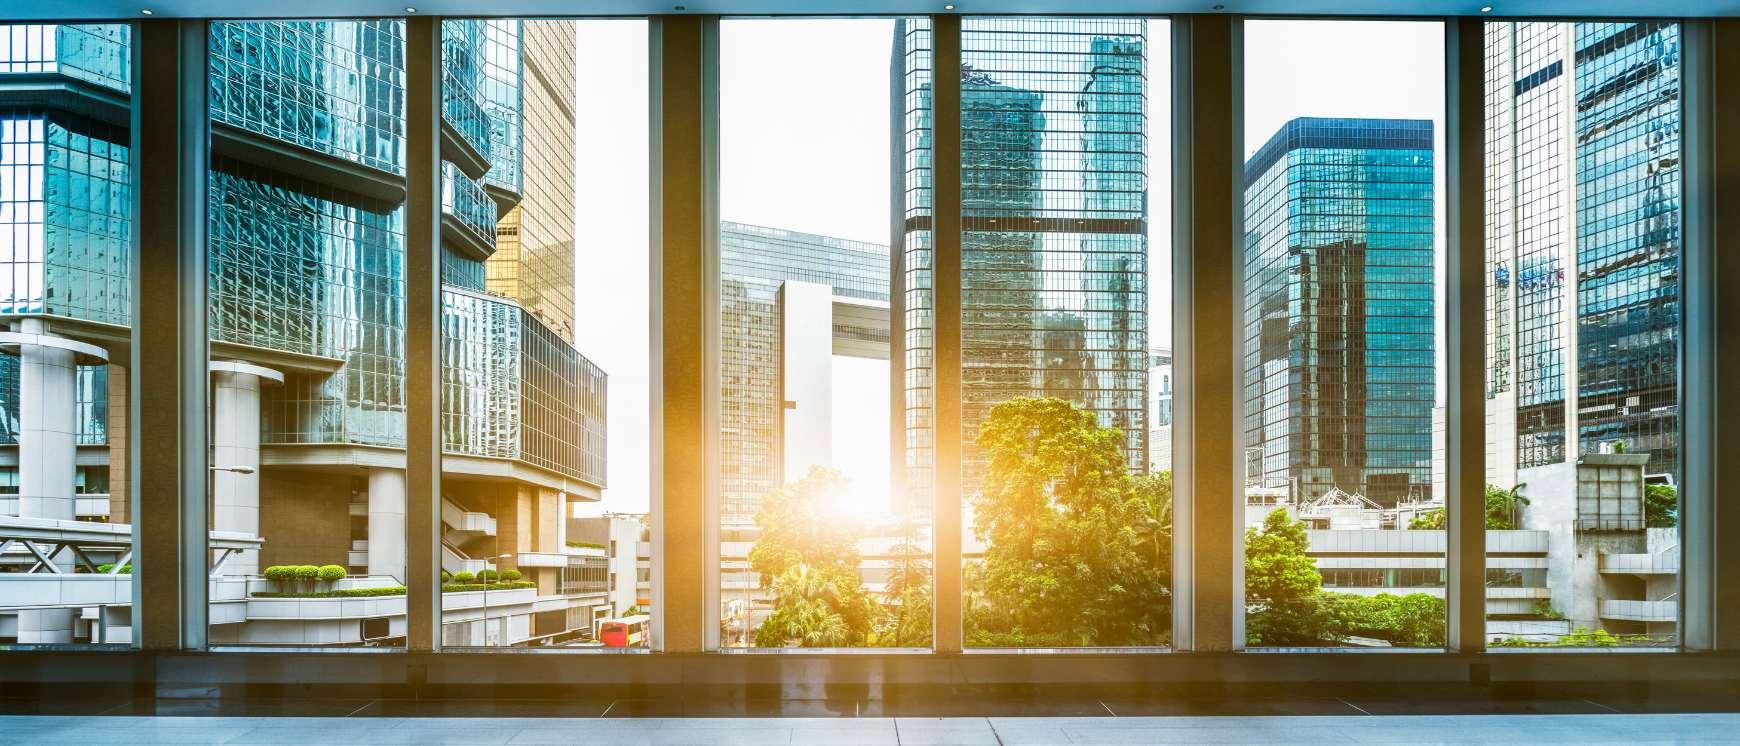 Panoramic view of corporate buildings through a window